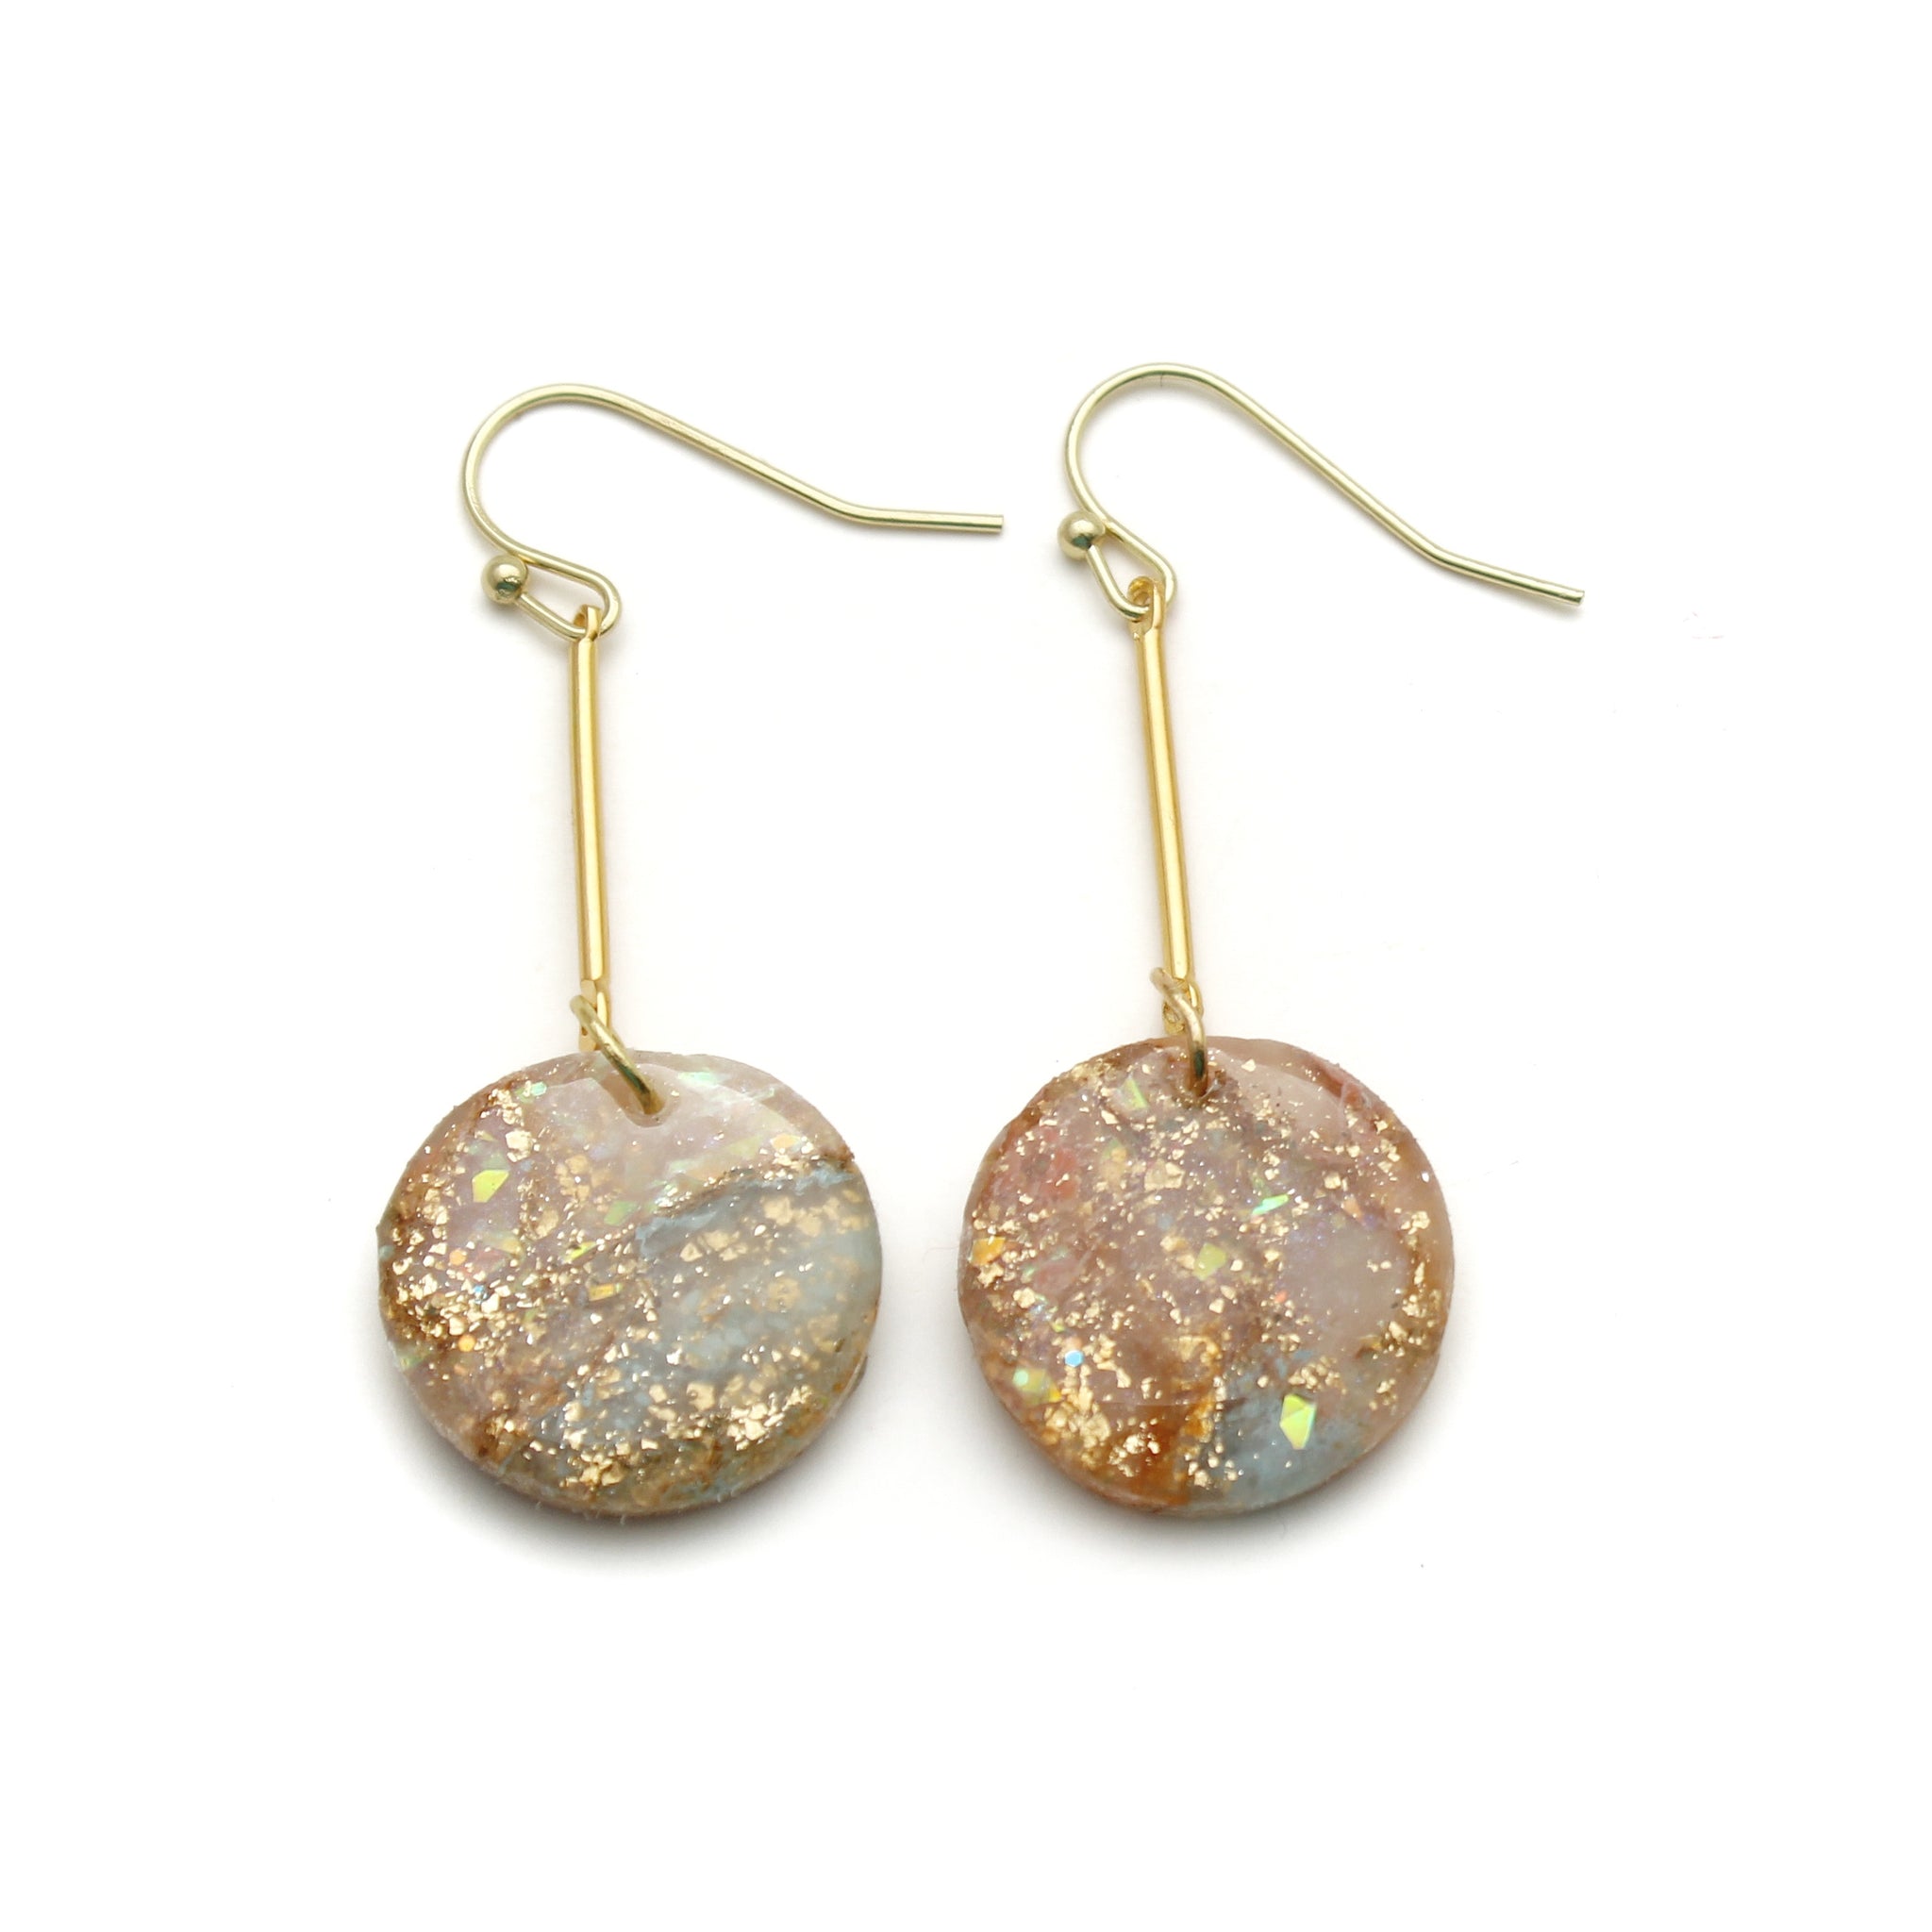 Blue, Mauve and Copper Round Drop Earrings